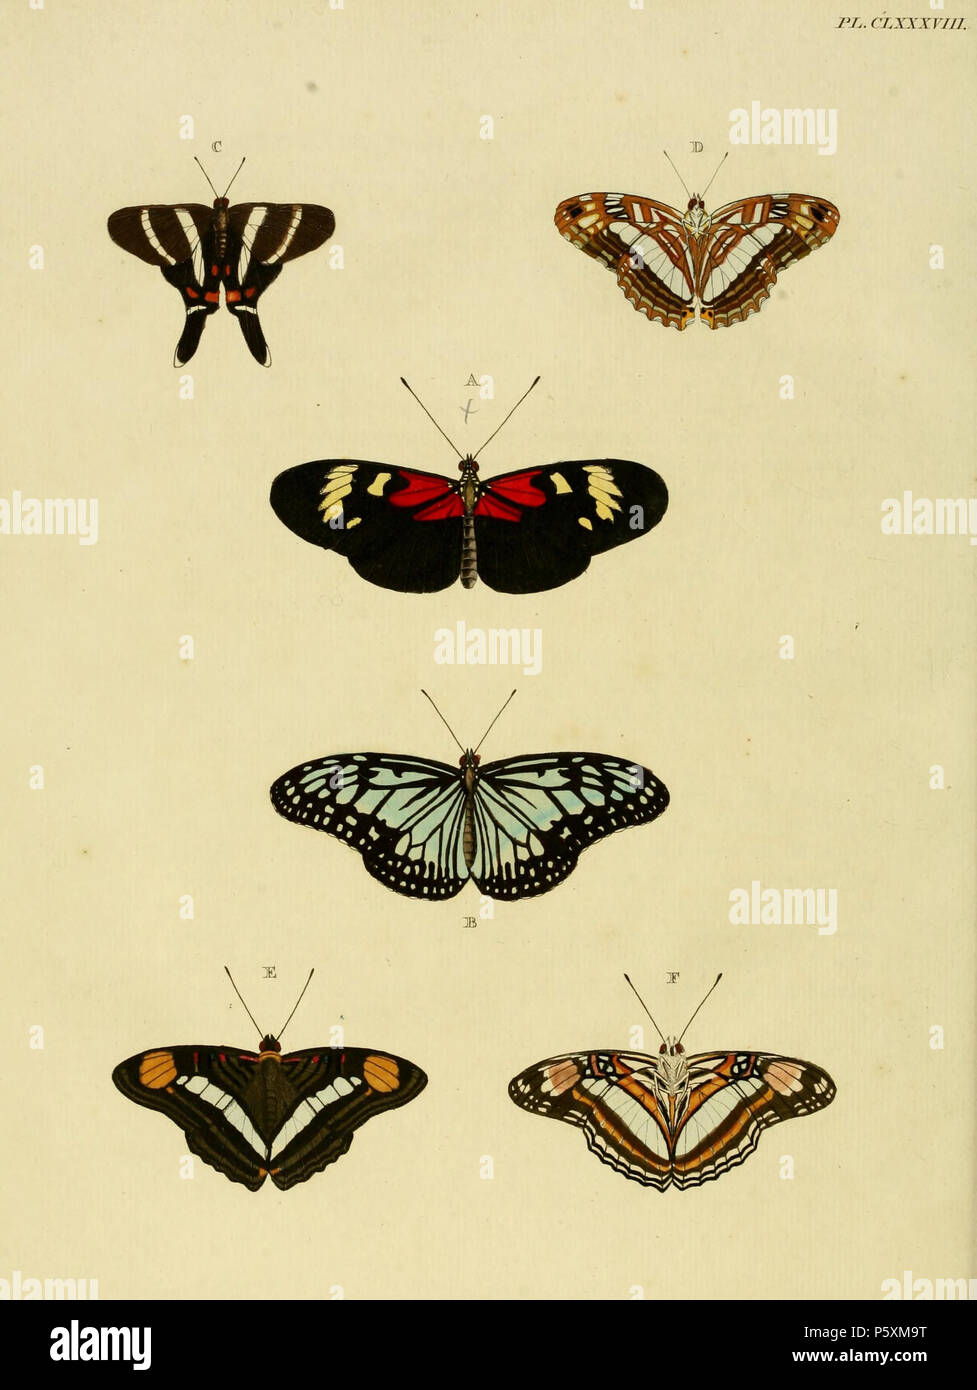 N/A. Plate CLXXXVIII A: '(Papilio) Cybele' ( = Heliconius melpomene meriana), see Funet. In register spelled as 'CYBILE'.  B: '(Papilio) Juventa' ( = Ideopsis juventa, iconotype), see Funet. C: '(Papilio) Periander' ( = Rhetus periander, iconotype), see Funet and The Global Lepidoptera Names Index, NHM. D: '(Papilio) Basilea' ( = Adelpha iphiclus), see Funet. Photos at Barcode of Life. E, F: '(Papilio) Iphicla' ( = Adelpha iphiclus iphiclus), see Funet. Photos at Barcode of Life. . 1779. Pieter Cramer (1721 - 1776) and Caspar Stoll (between 1725 and 1730 - 1791) 389 CramerAndStoll-uitlandsche  Stock Photo